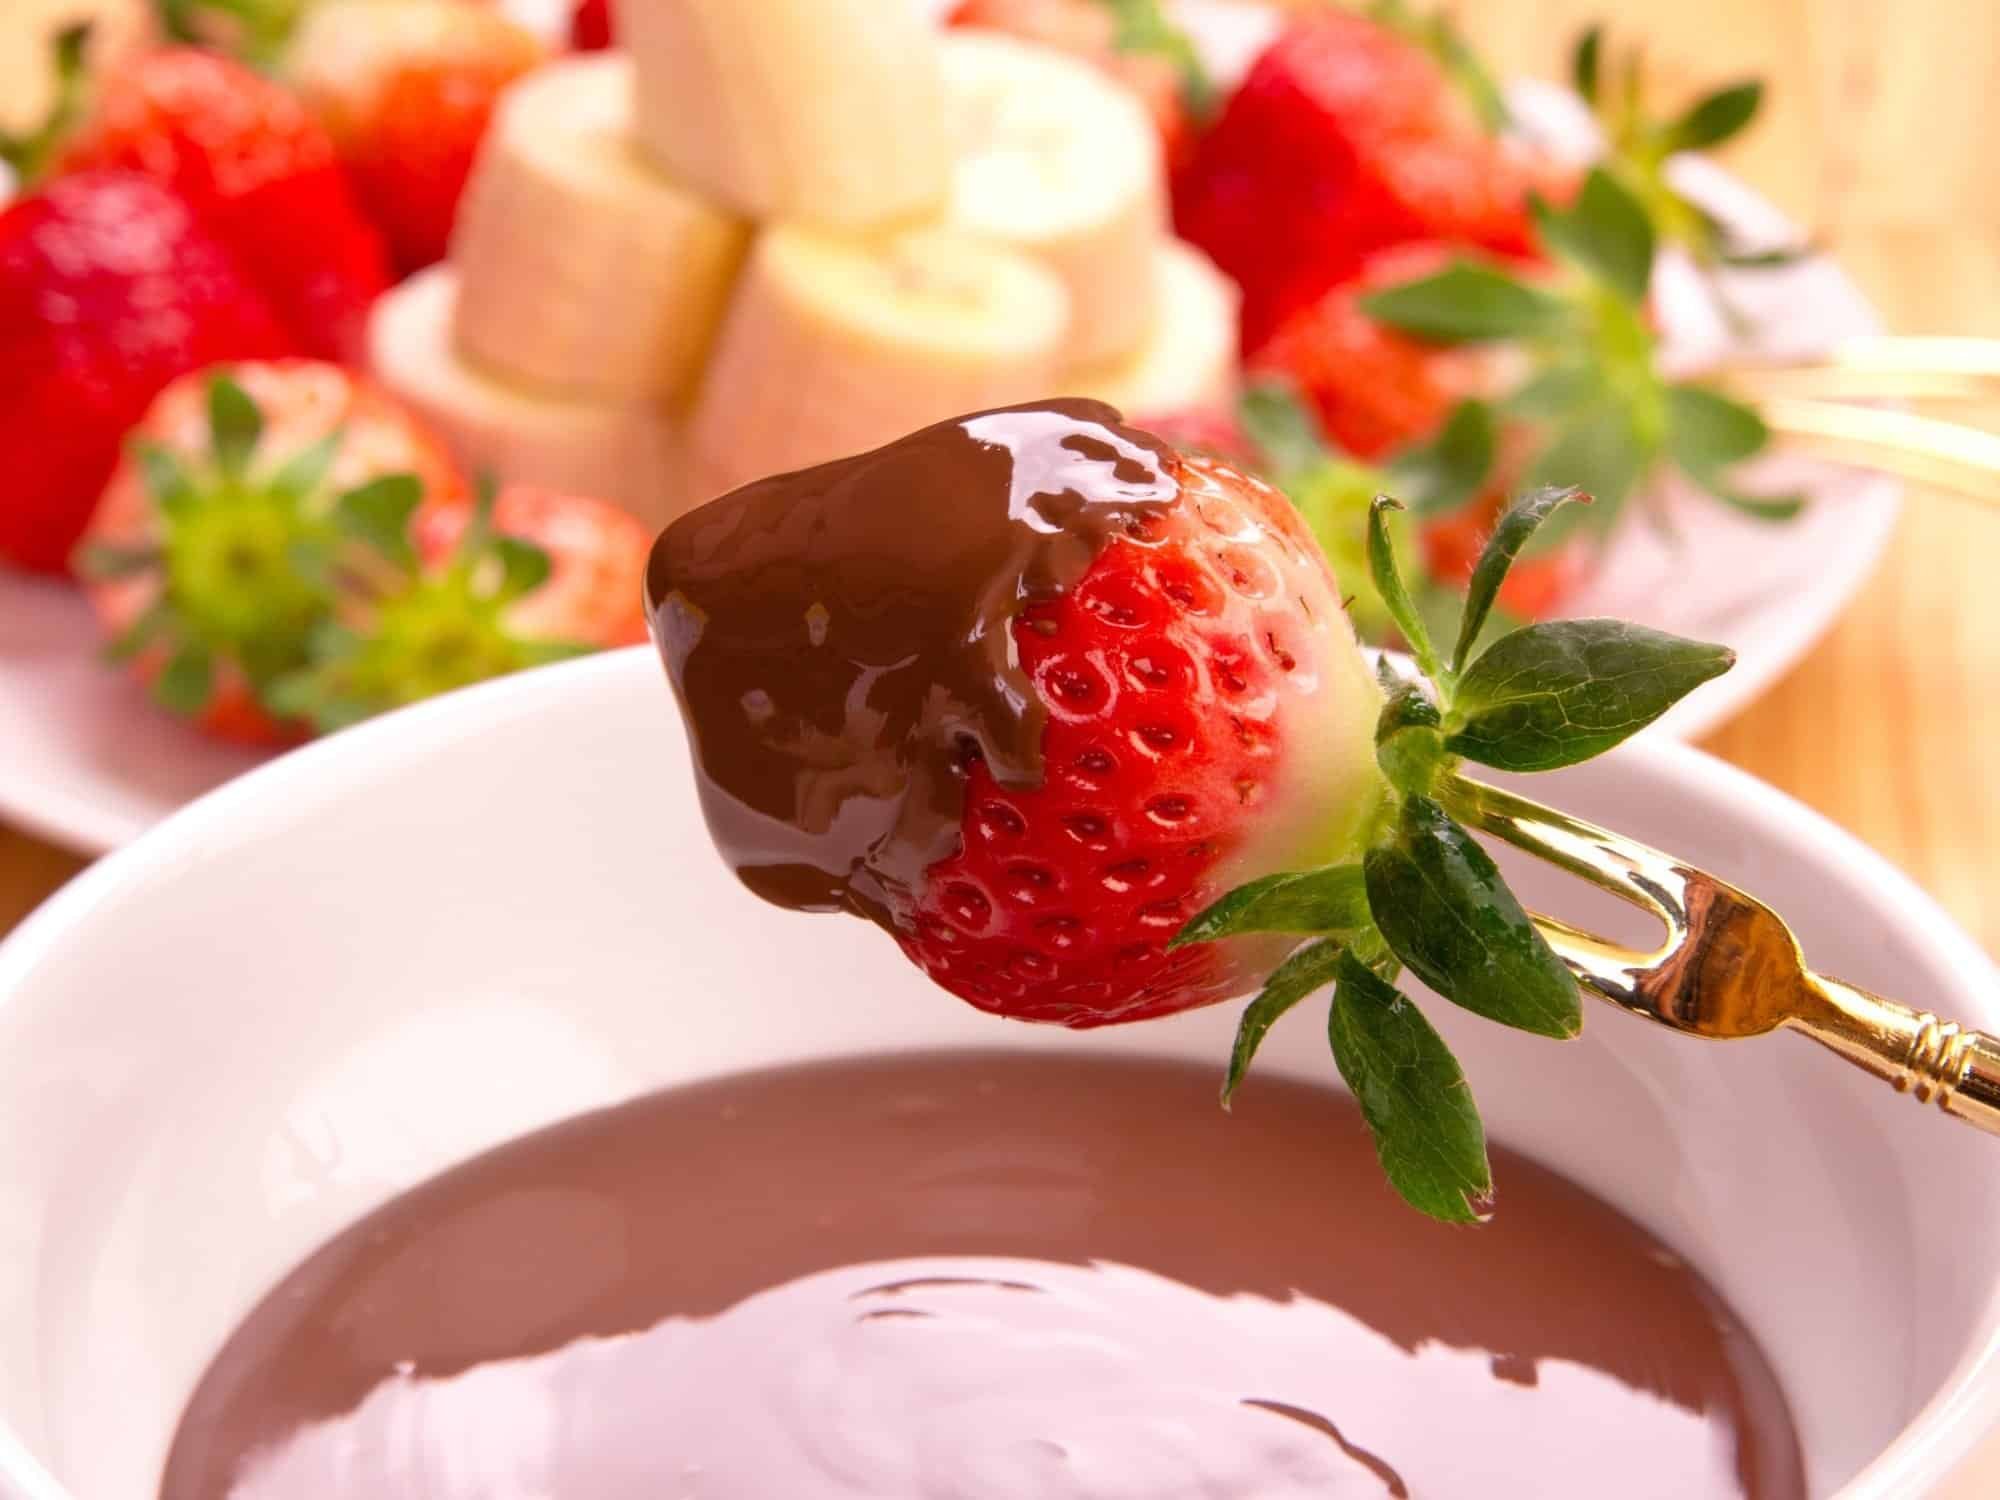 The Ultimate Guide to Hosting a Fondue Party - Cheese & Chocolate Fondue